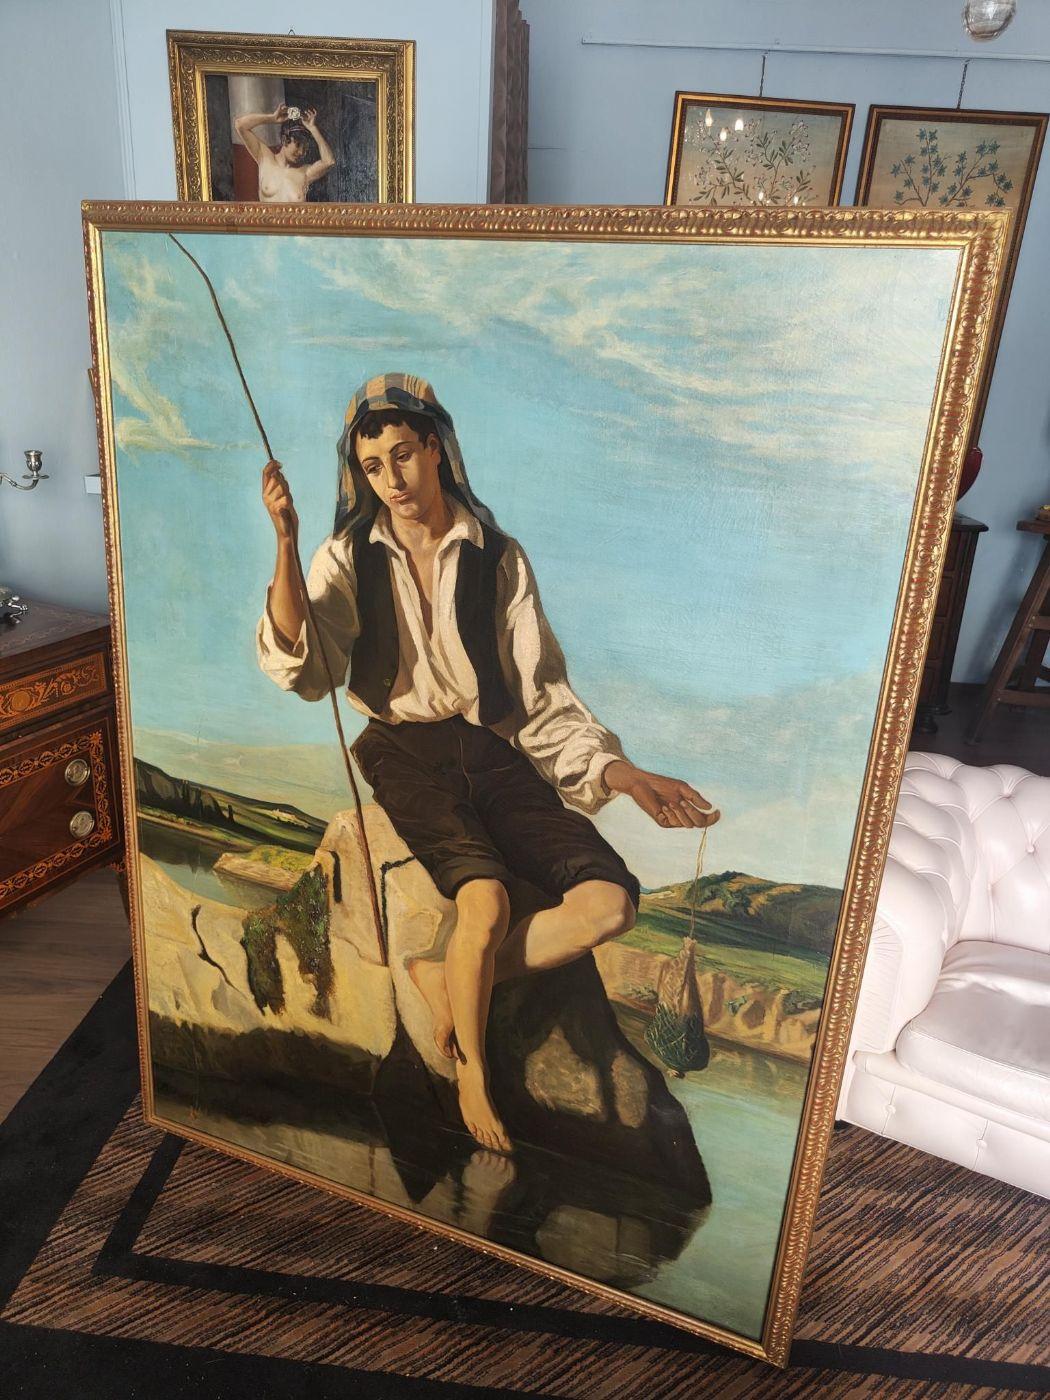 Large painting depicting fisherman.
Epoch: 19th century.
Henry Bidauld born 1839 Sainte Colombe de bois ( Nievre ) died 1898 in Rossillon was a painter and illustrator.
Henri Bidauld is grandson of painter Jean-Pierre-Xavier Bidauld (1745-1813) and